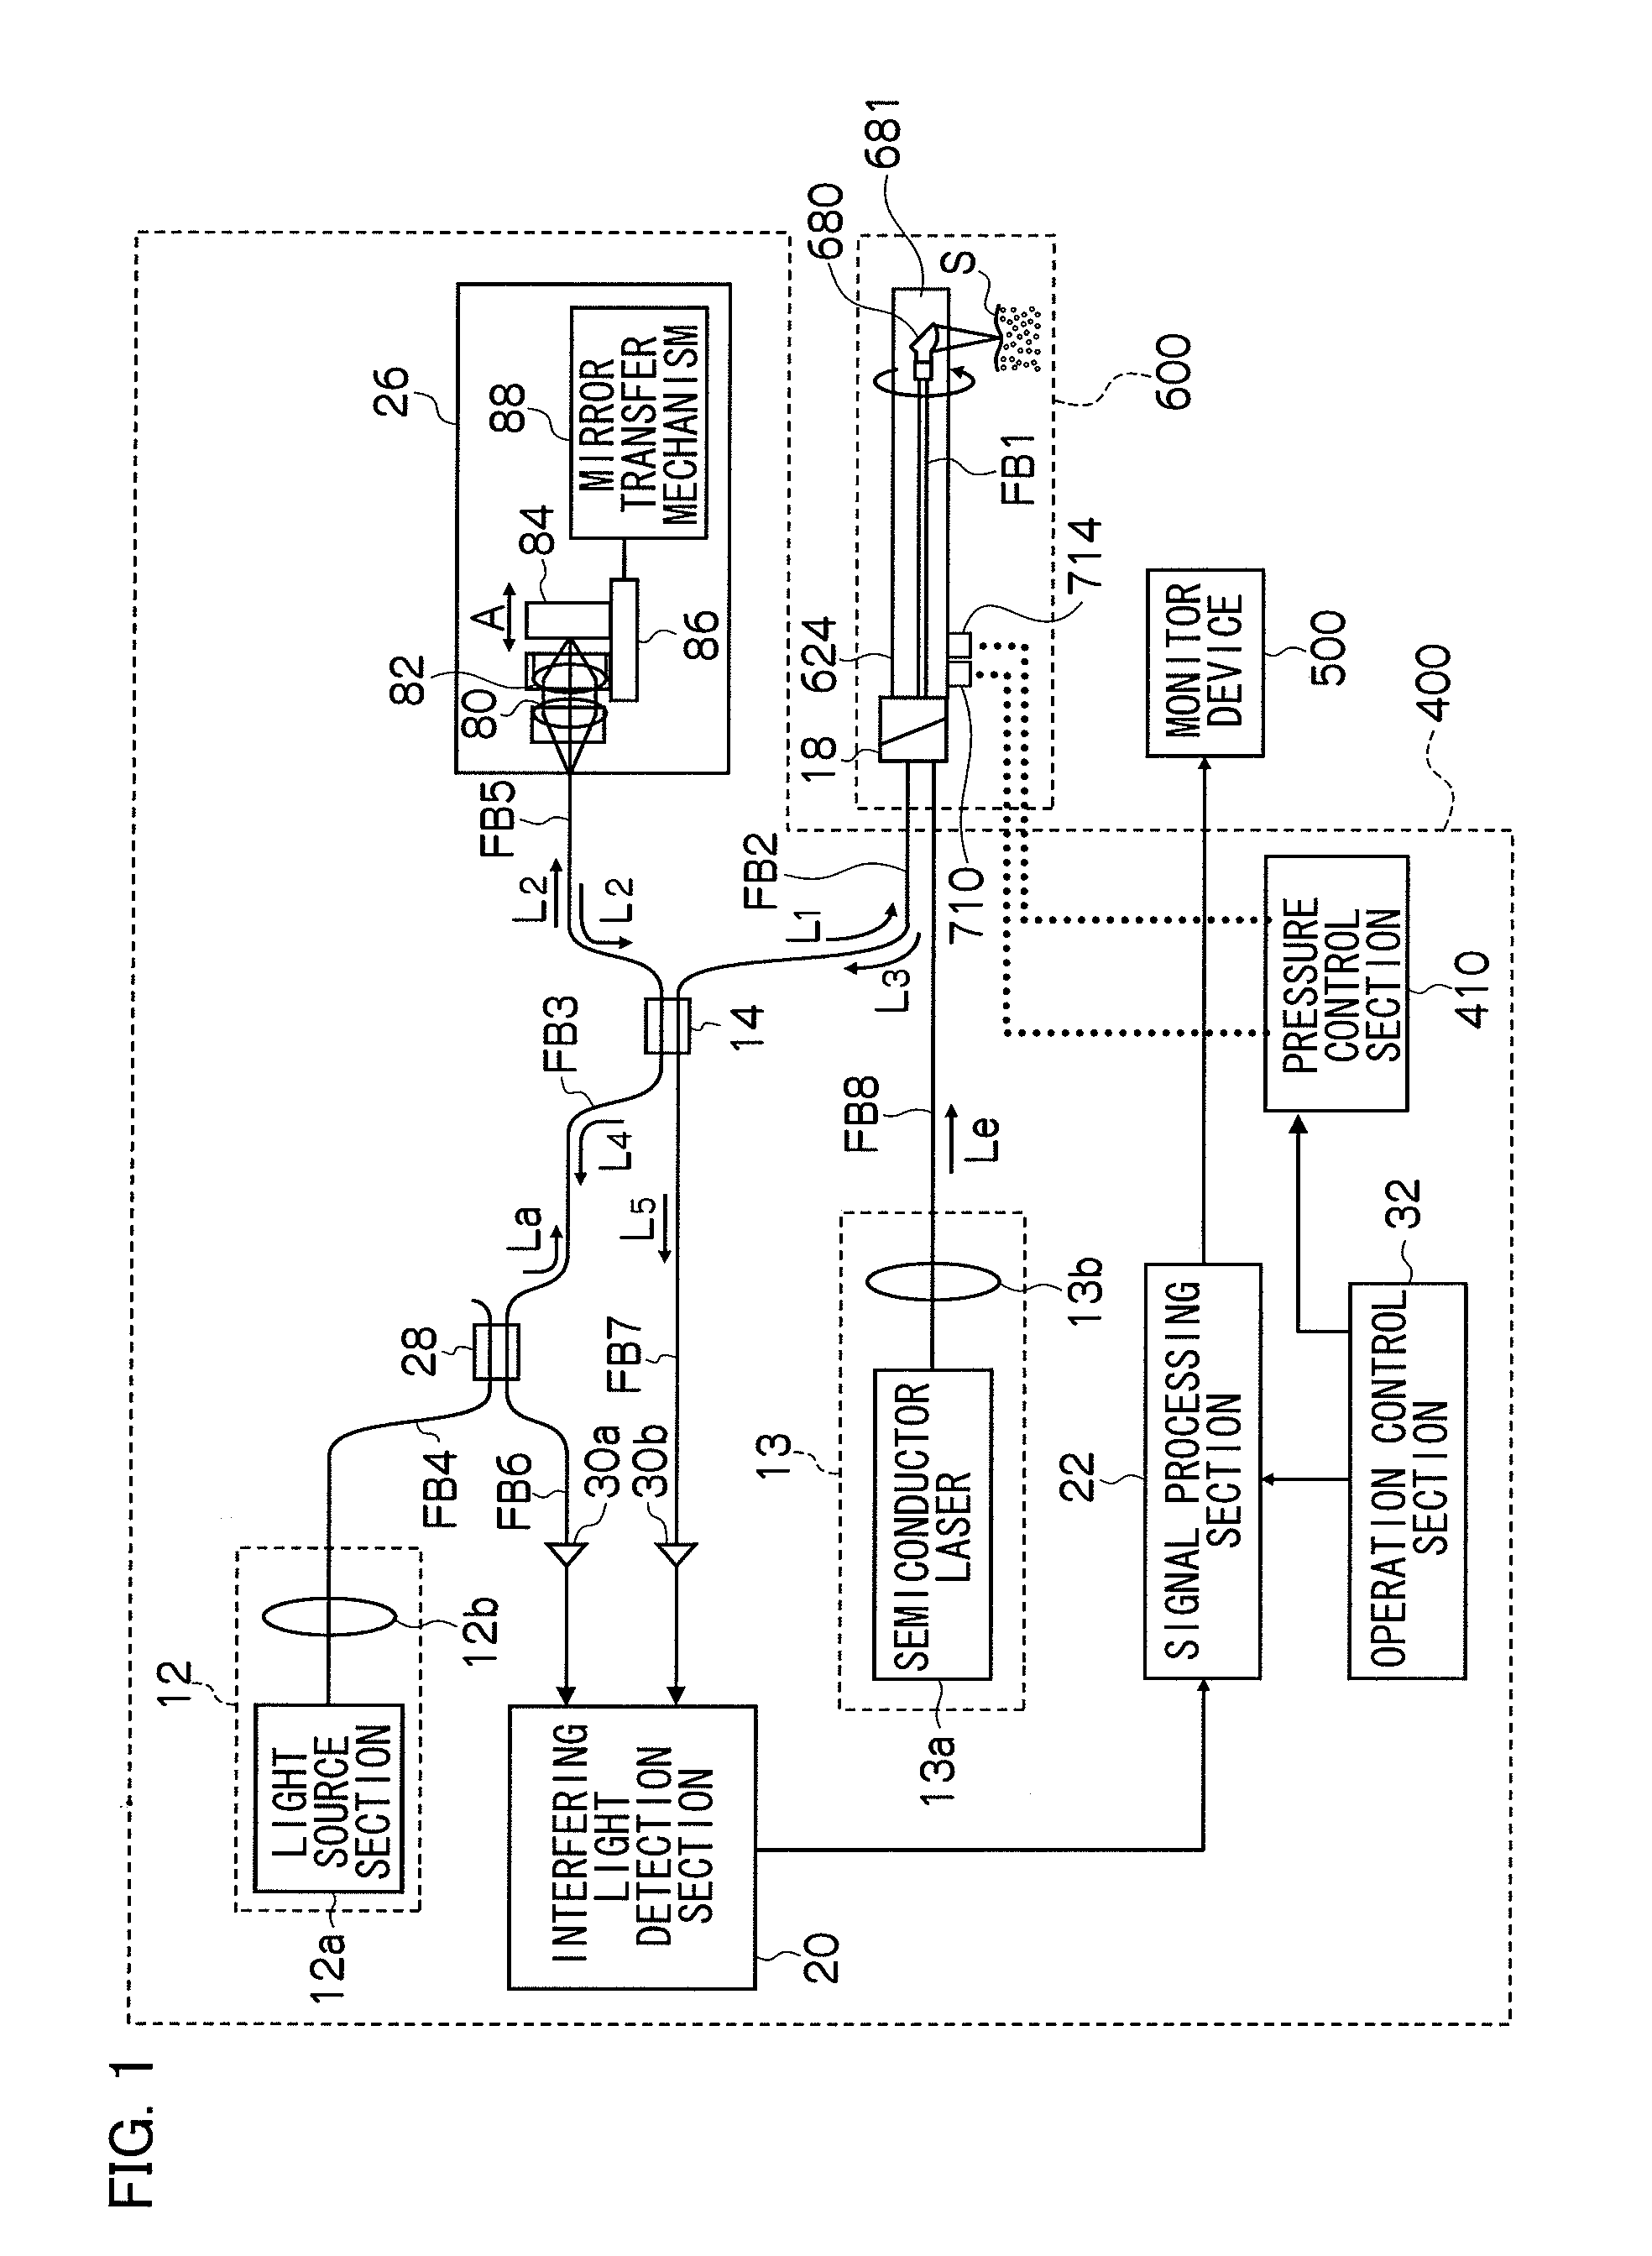 Optical probe, drive control method therefor, and endoscope apparatus